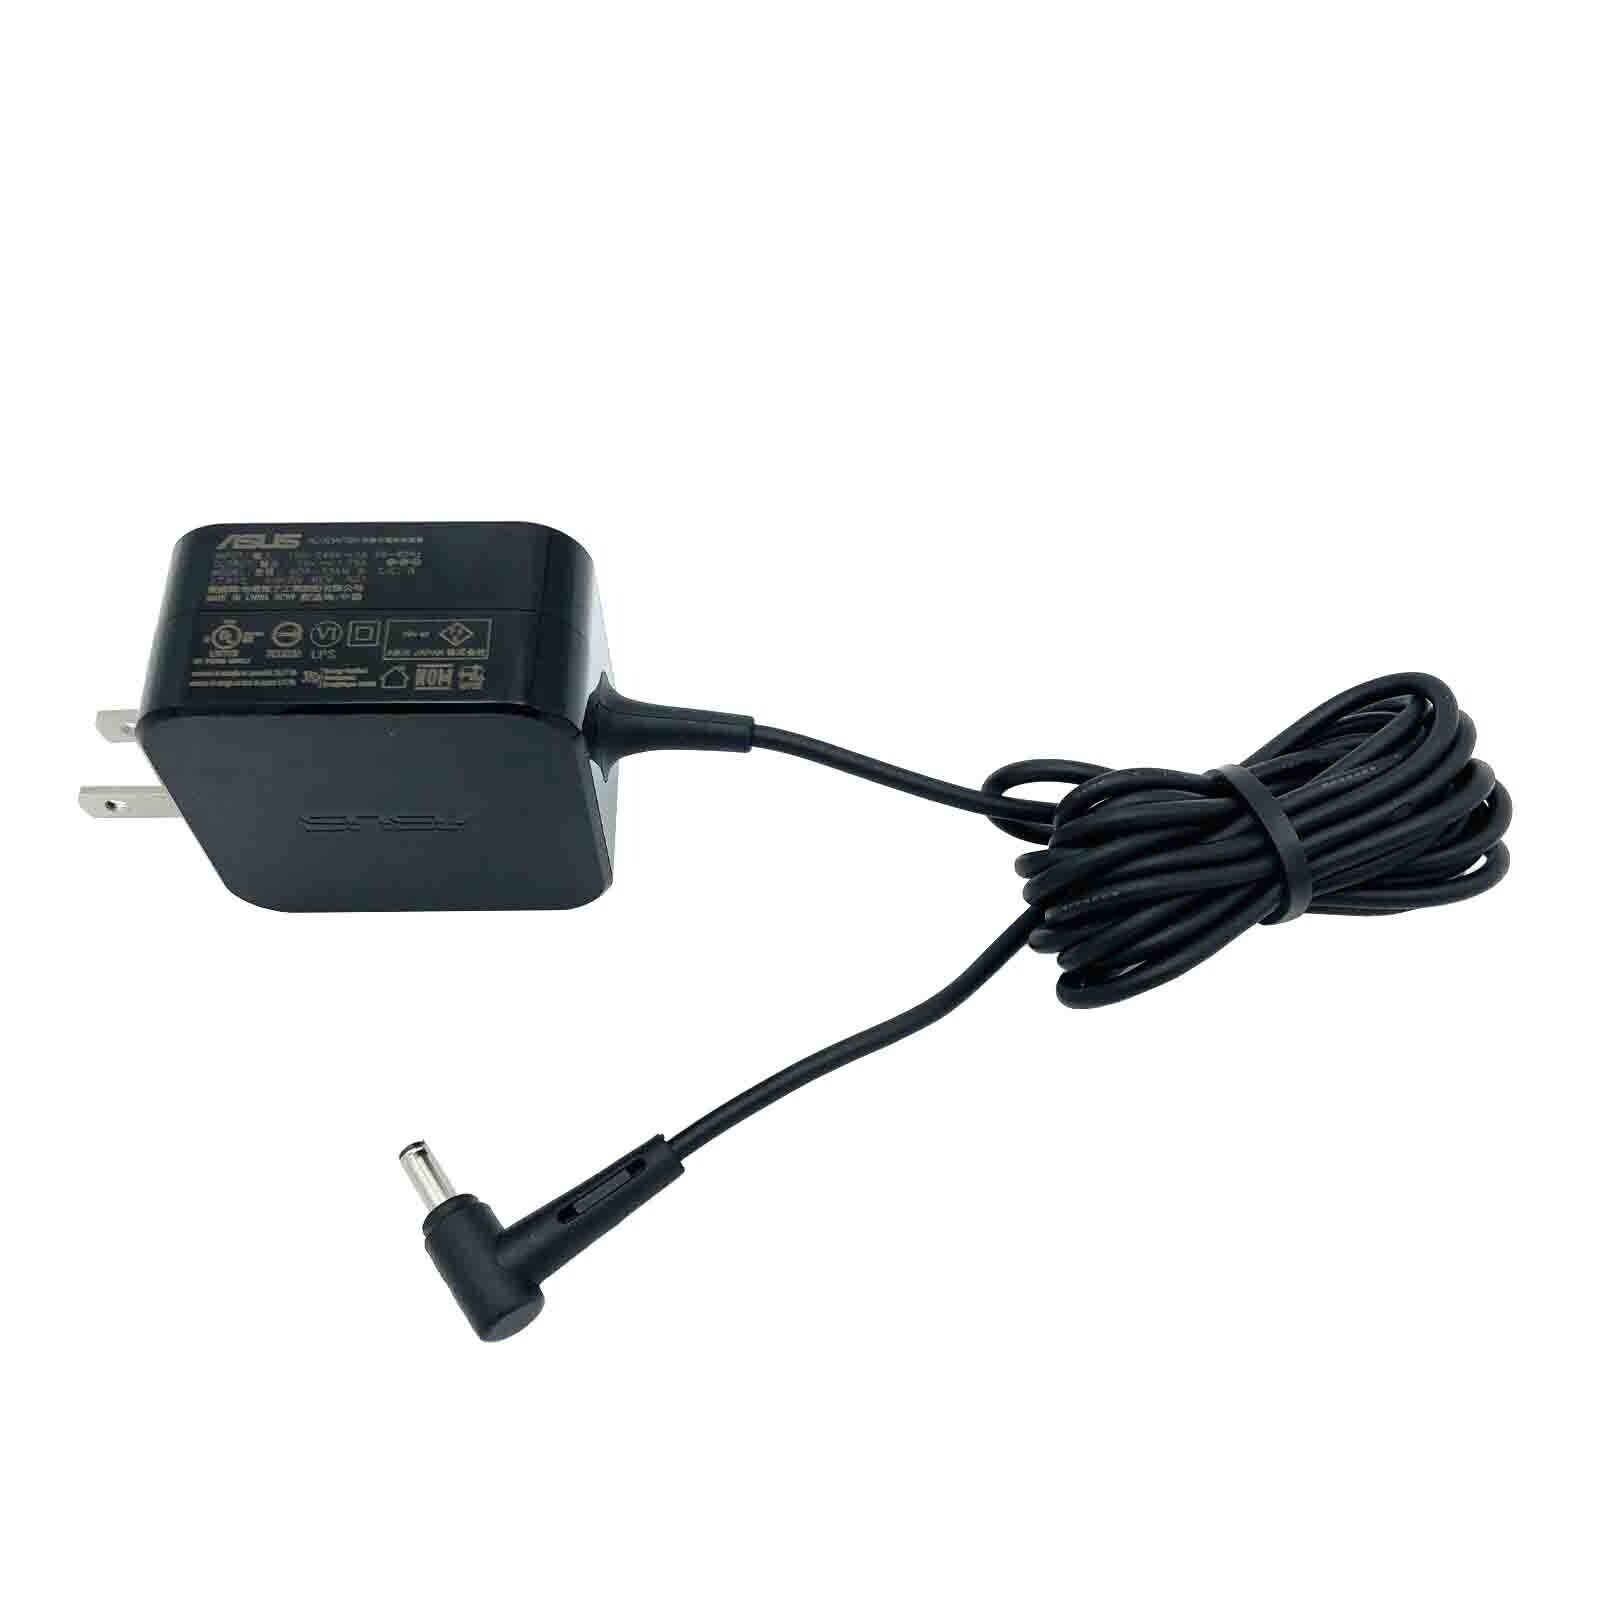 NEW Genuine Asus 19V AC Adapter For Asus ZenWiFi XT8 AX6600 Tri Band WiFi Router